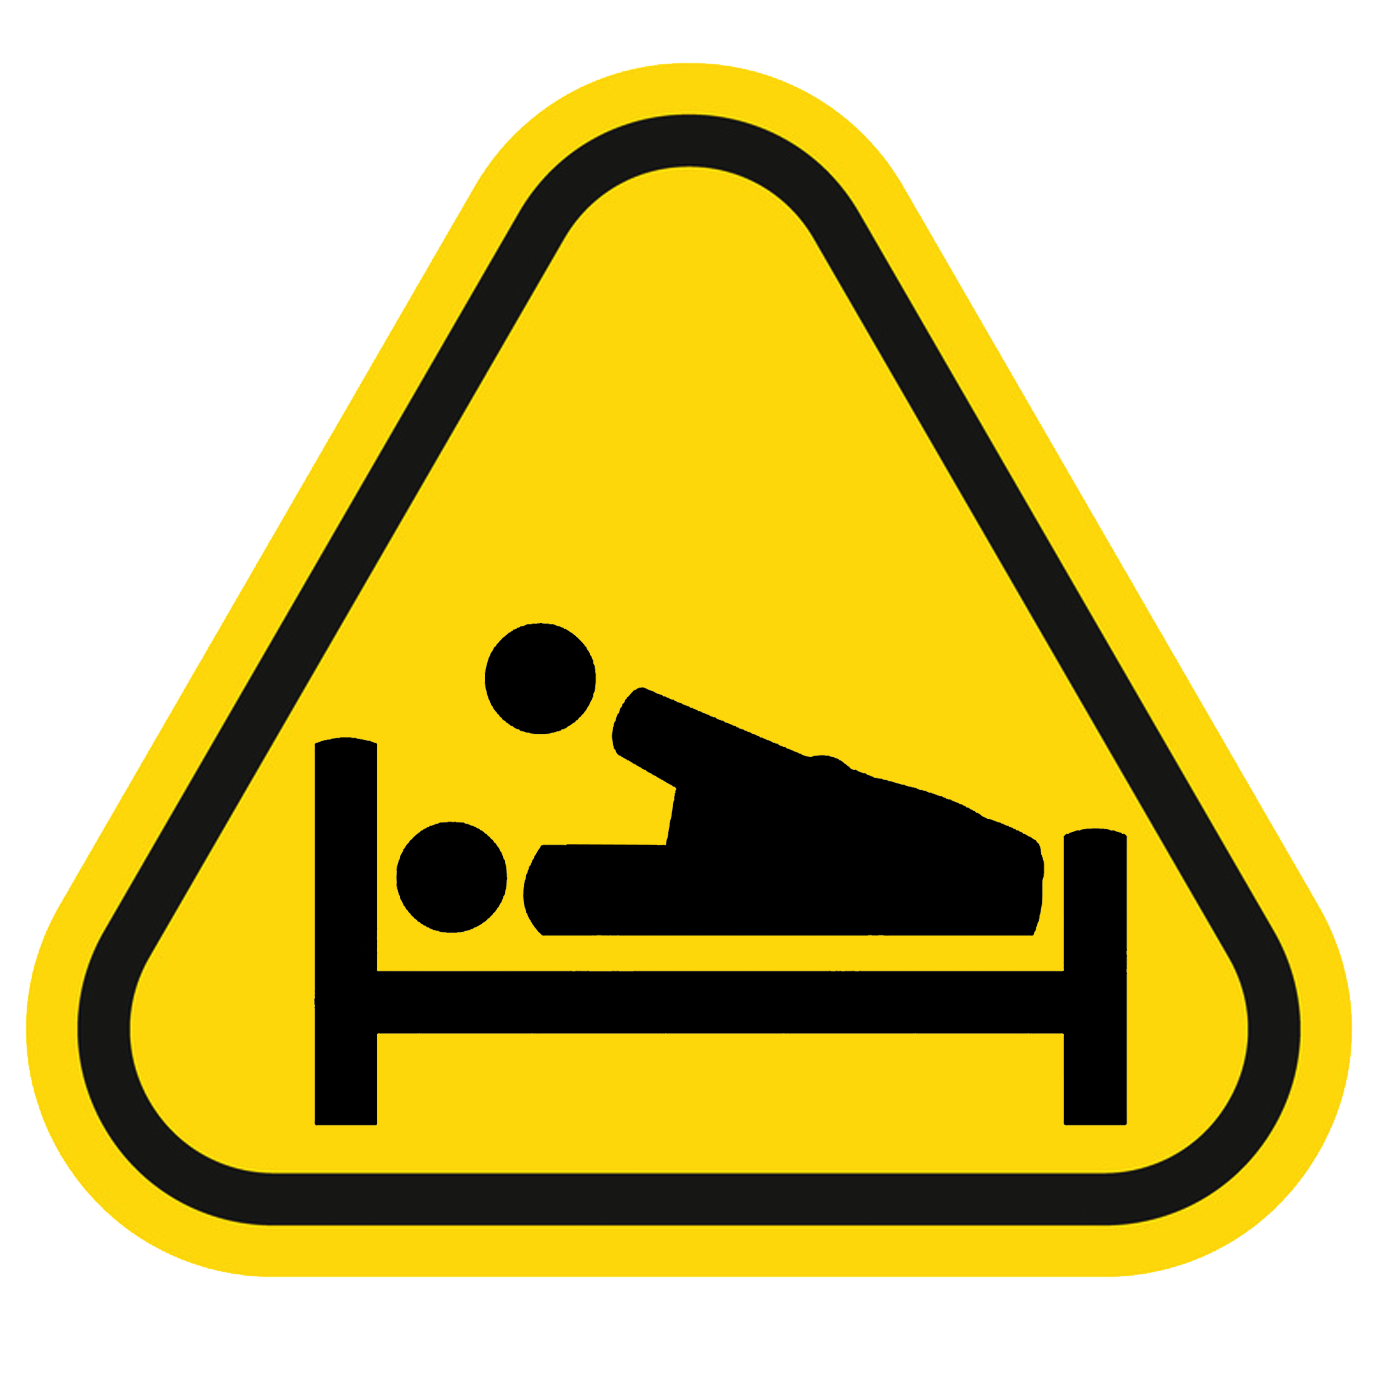 caution icon featuring figures laying in a bed